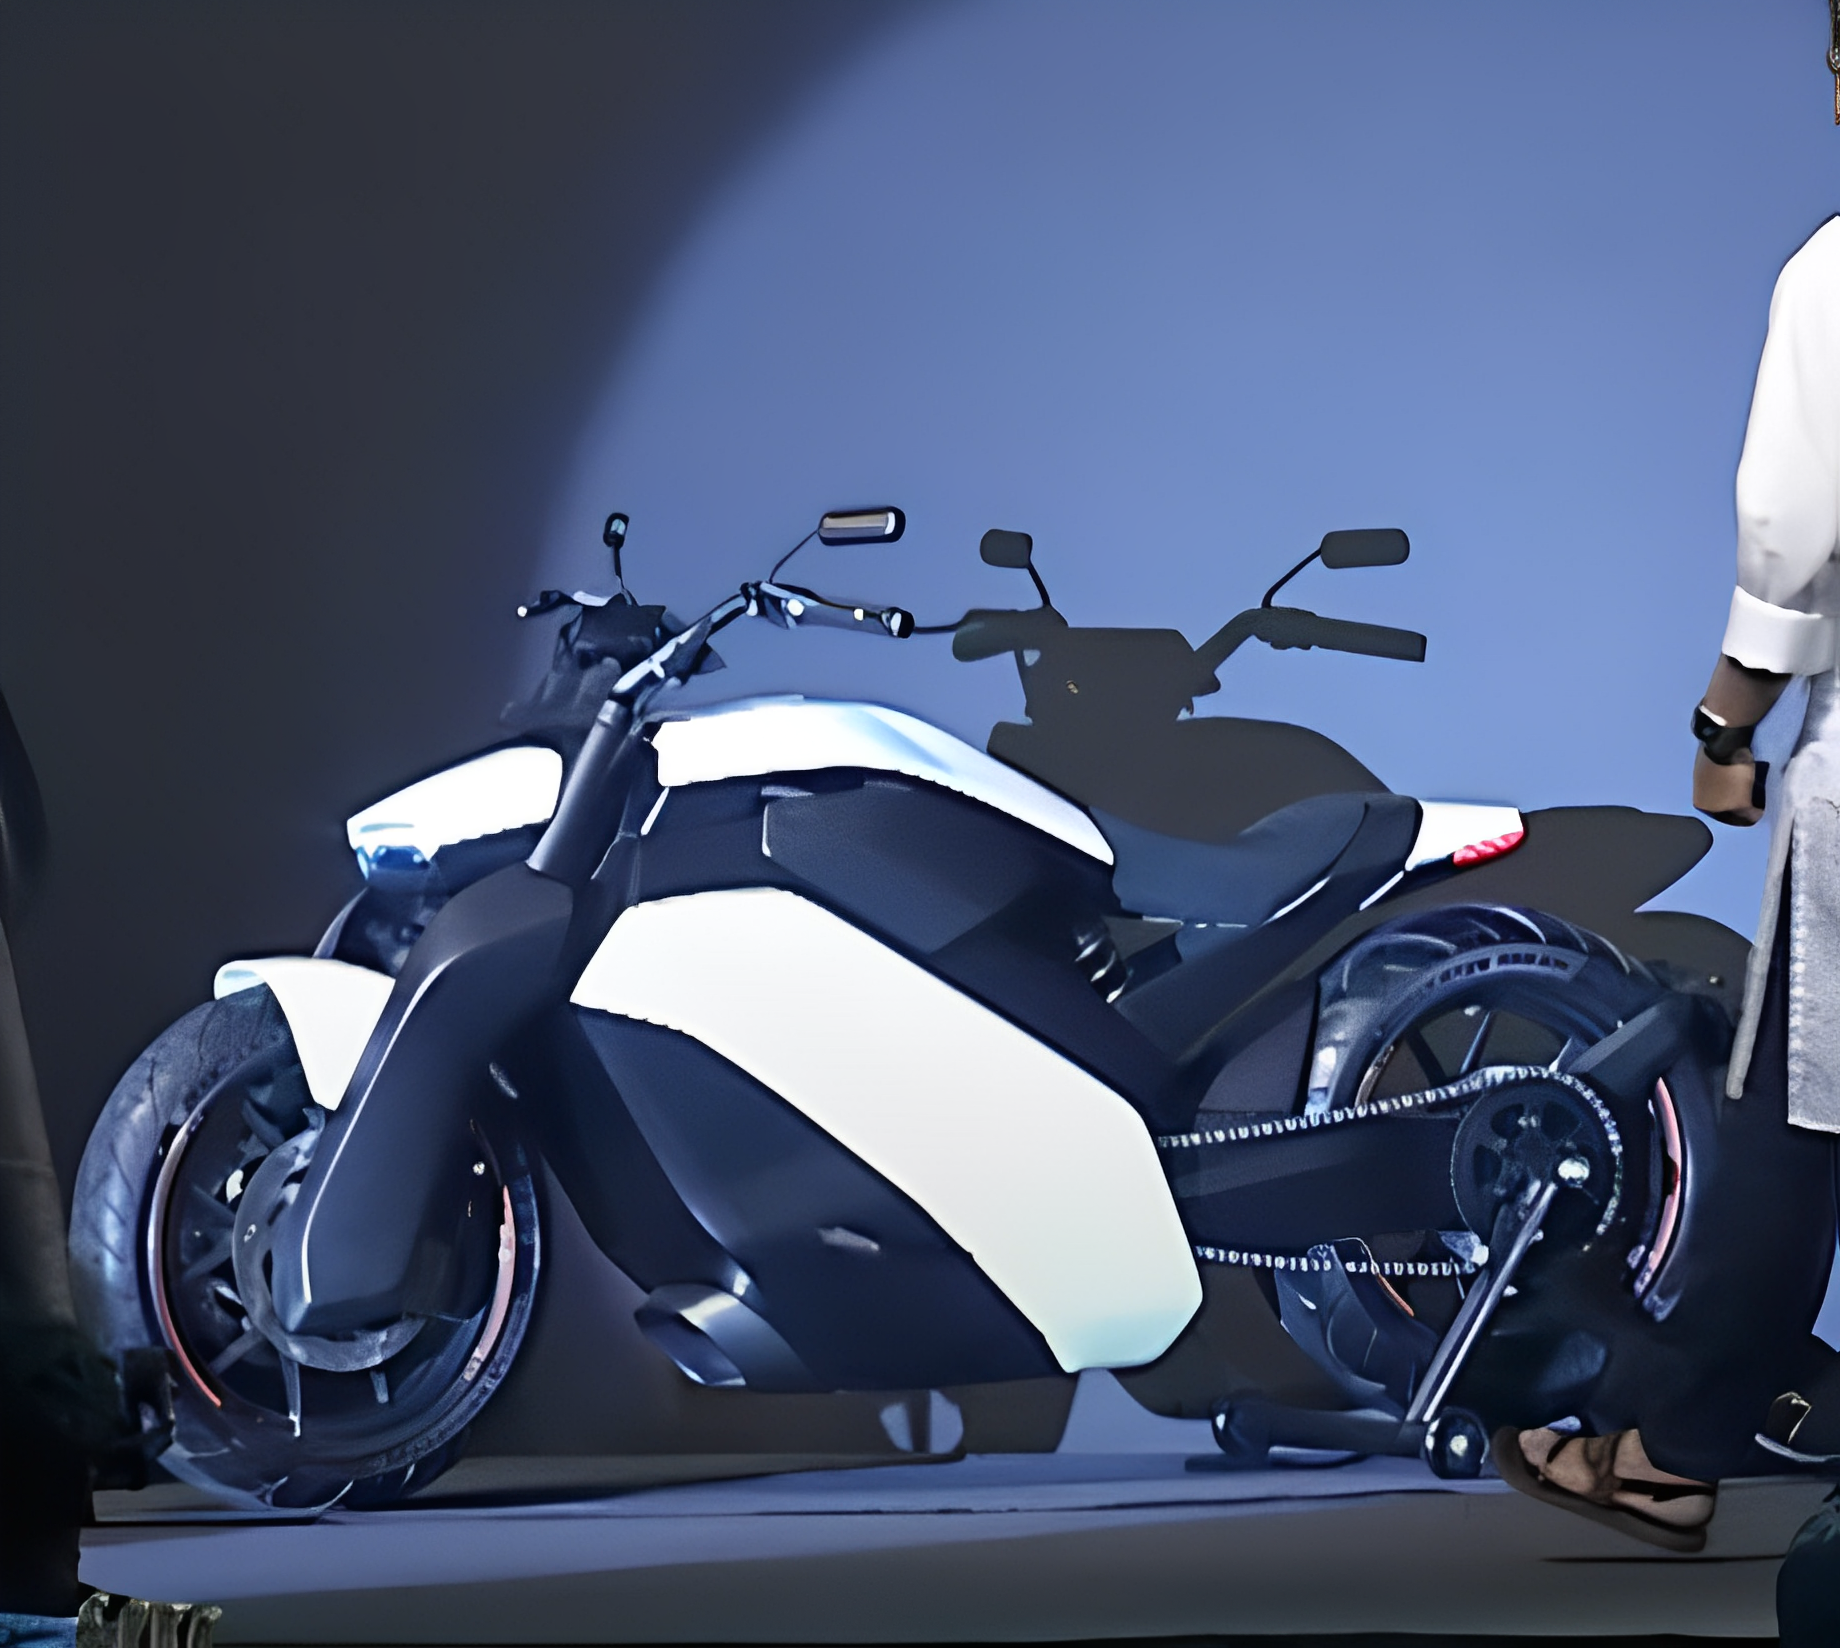 https://e-vehicleinfo.com/ola-electric-unveiled-4-new-electric-motorcycle-cruiser-adventure-roadster-and-diamondhead/